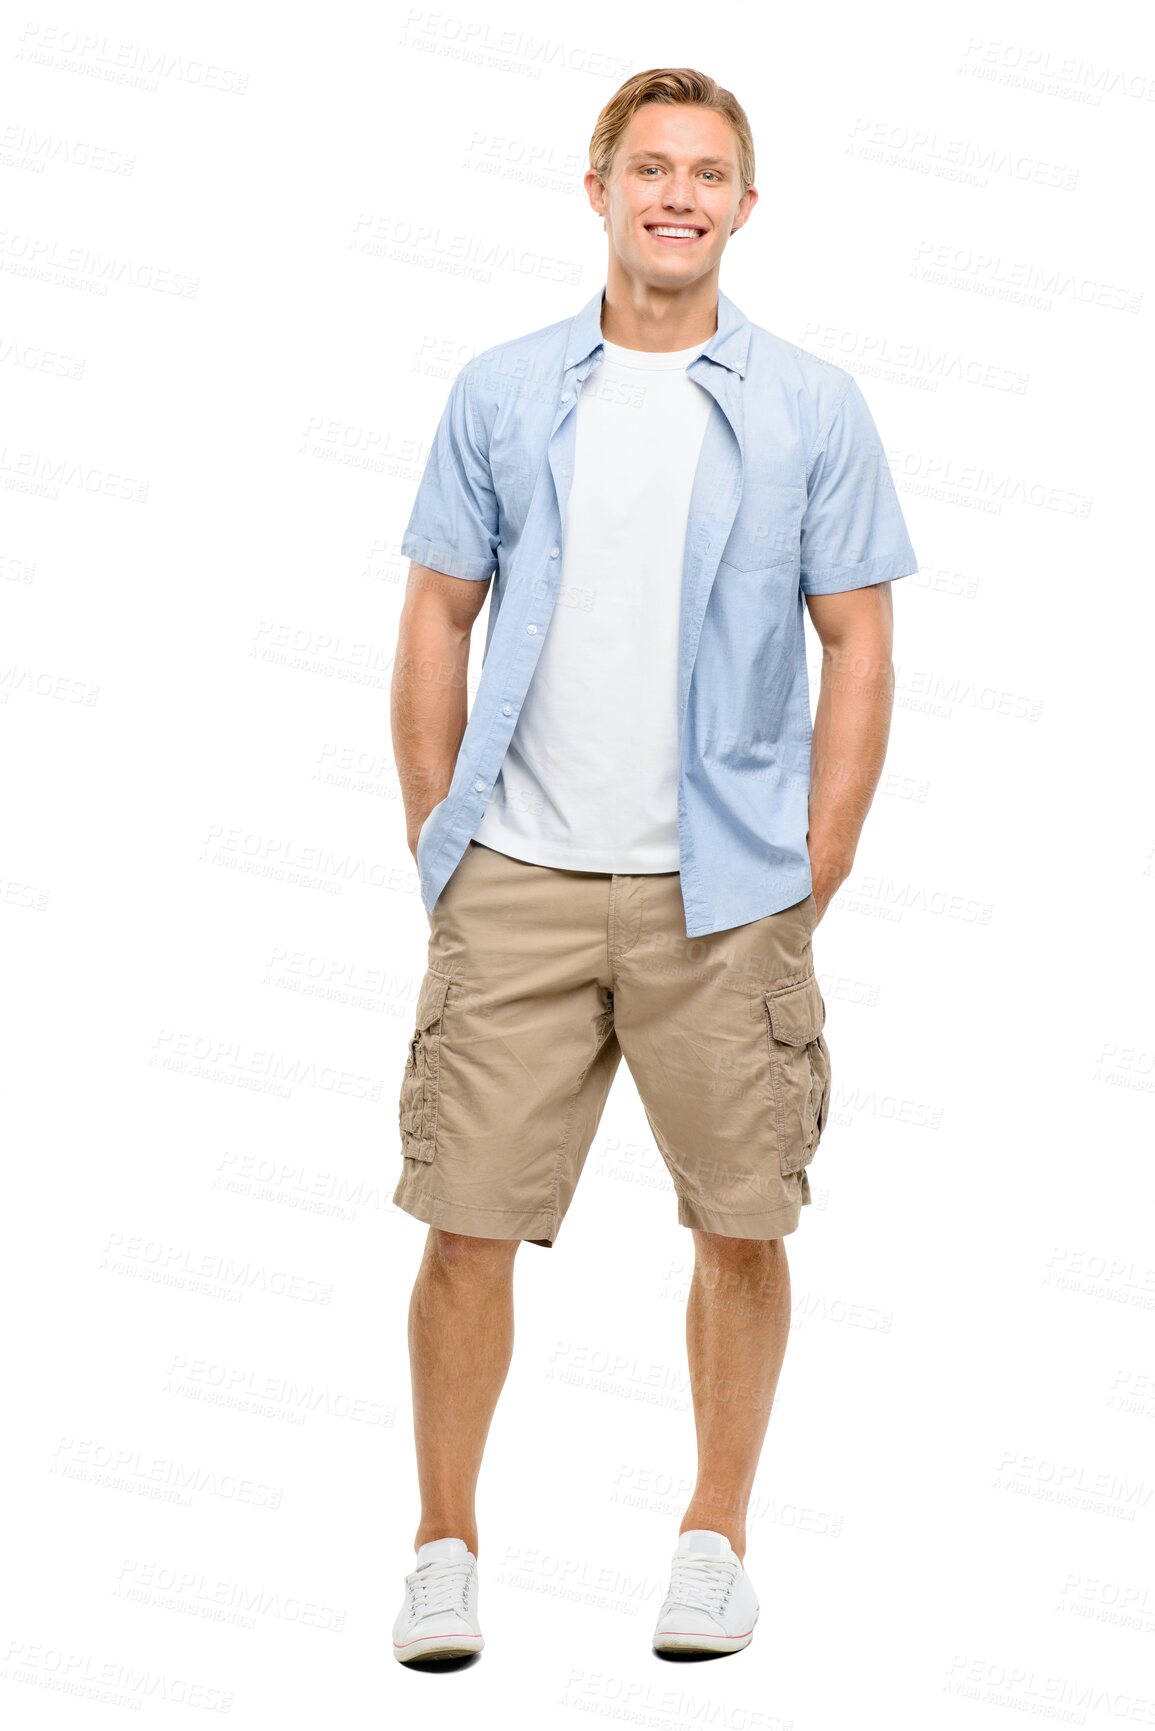 Buy stock photo Relax, happy and portrait of a man in clothes for summer isolated on a transparent png background. Smile, confident and a young stylish and fashionable model or person in casual fashion for spring